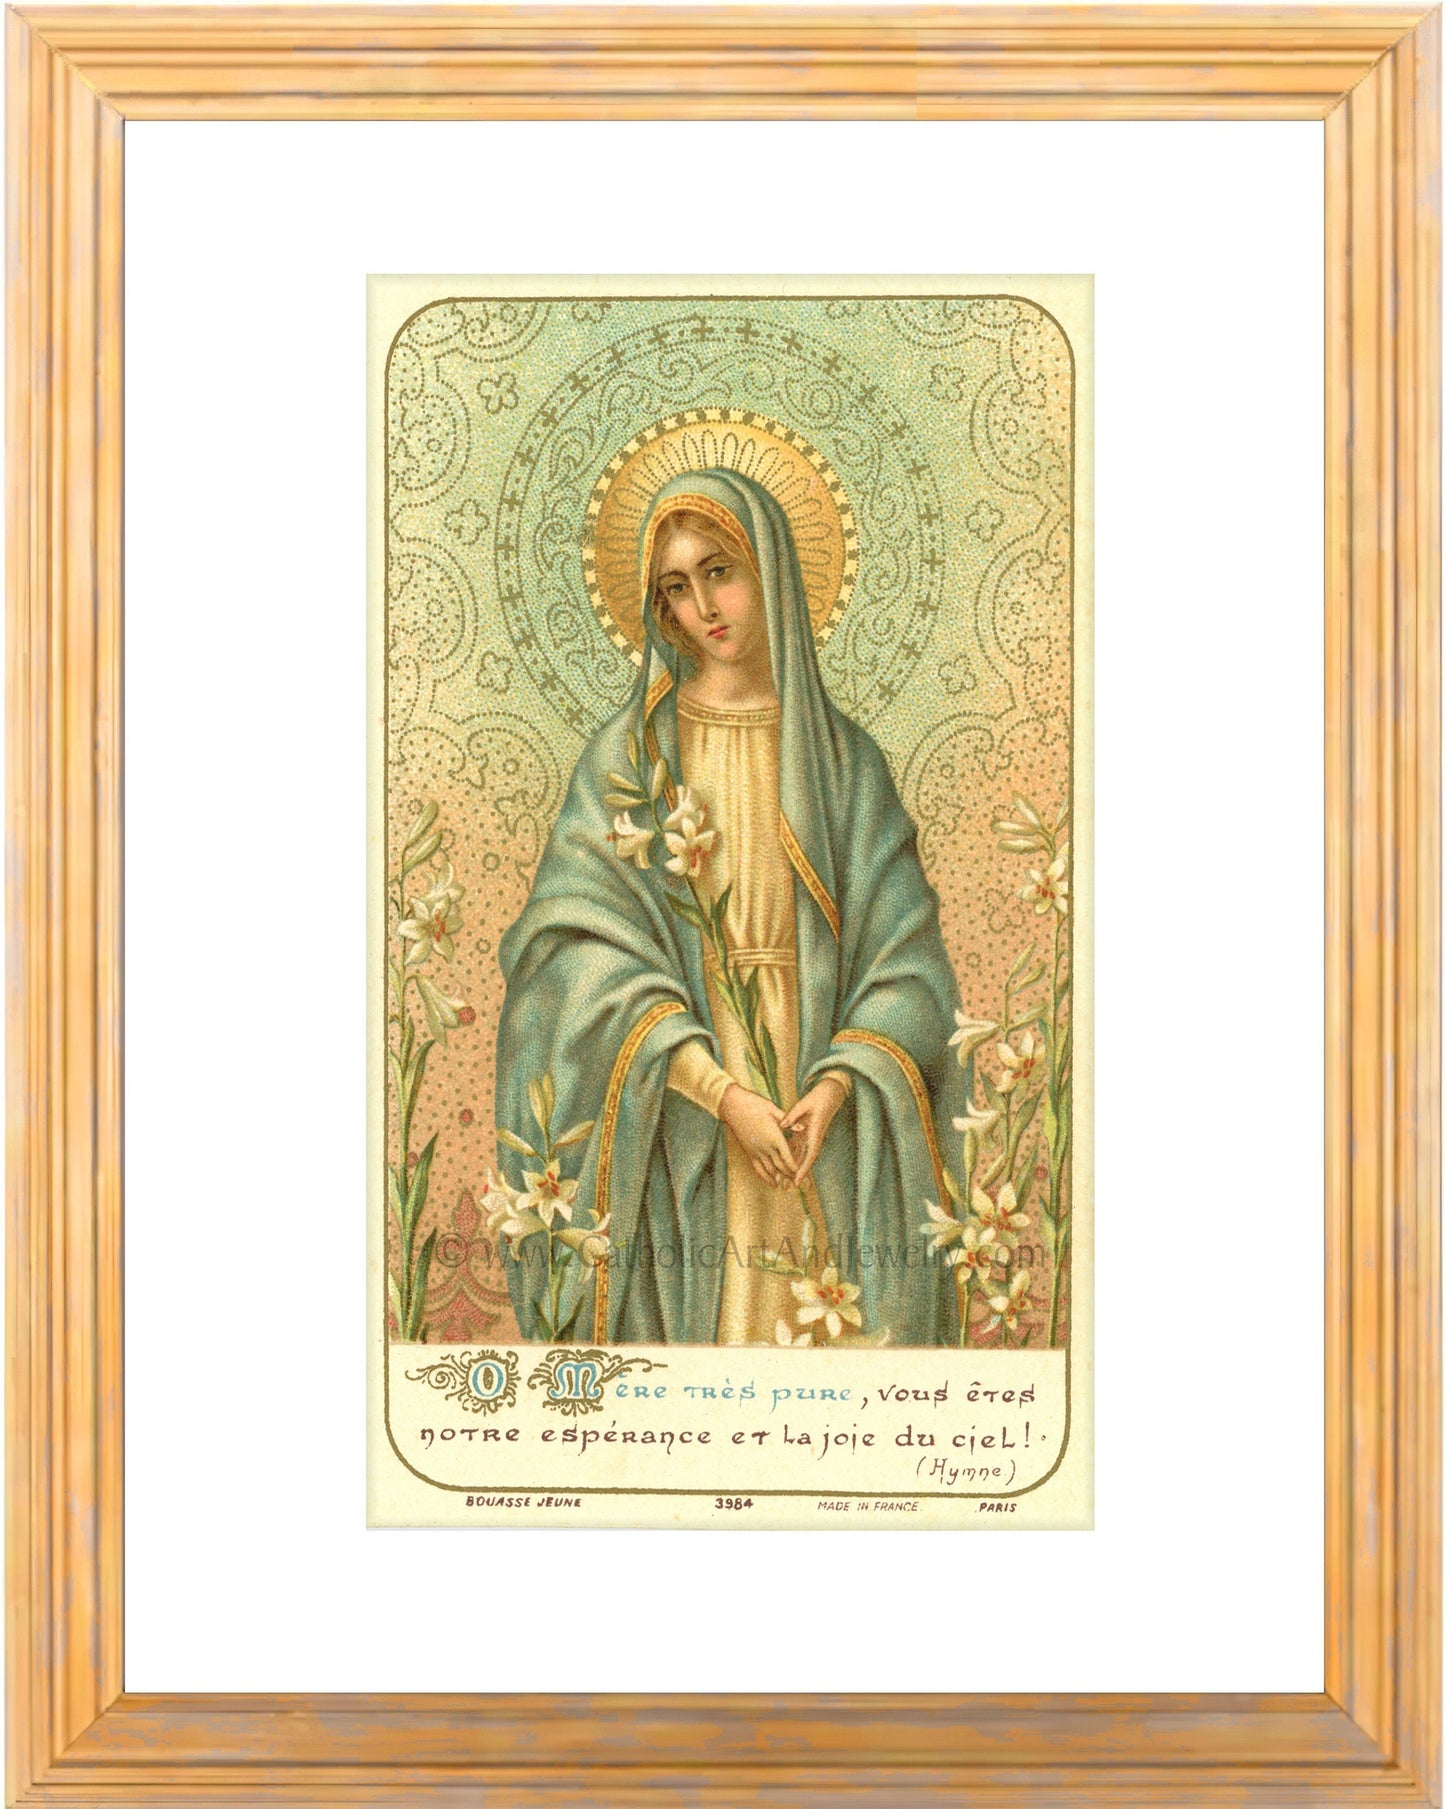 Our Lady of the Lilies – Based on a Vintage French Holy Card